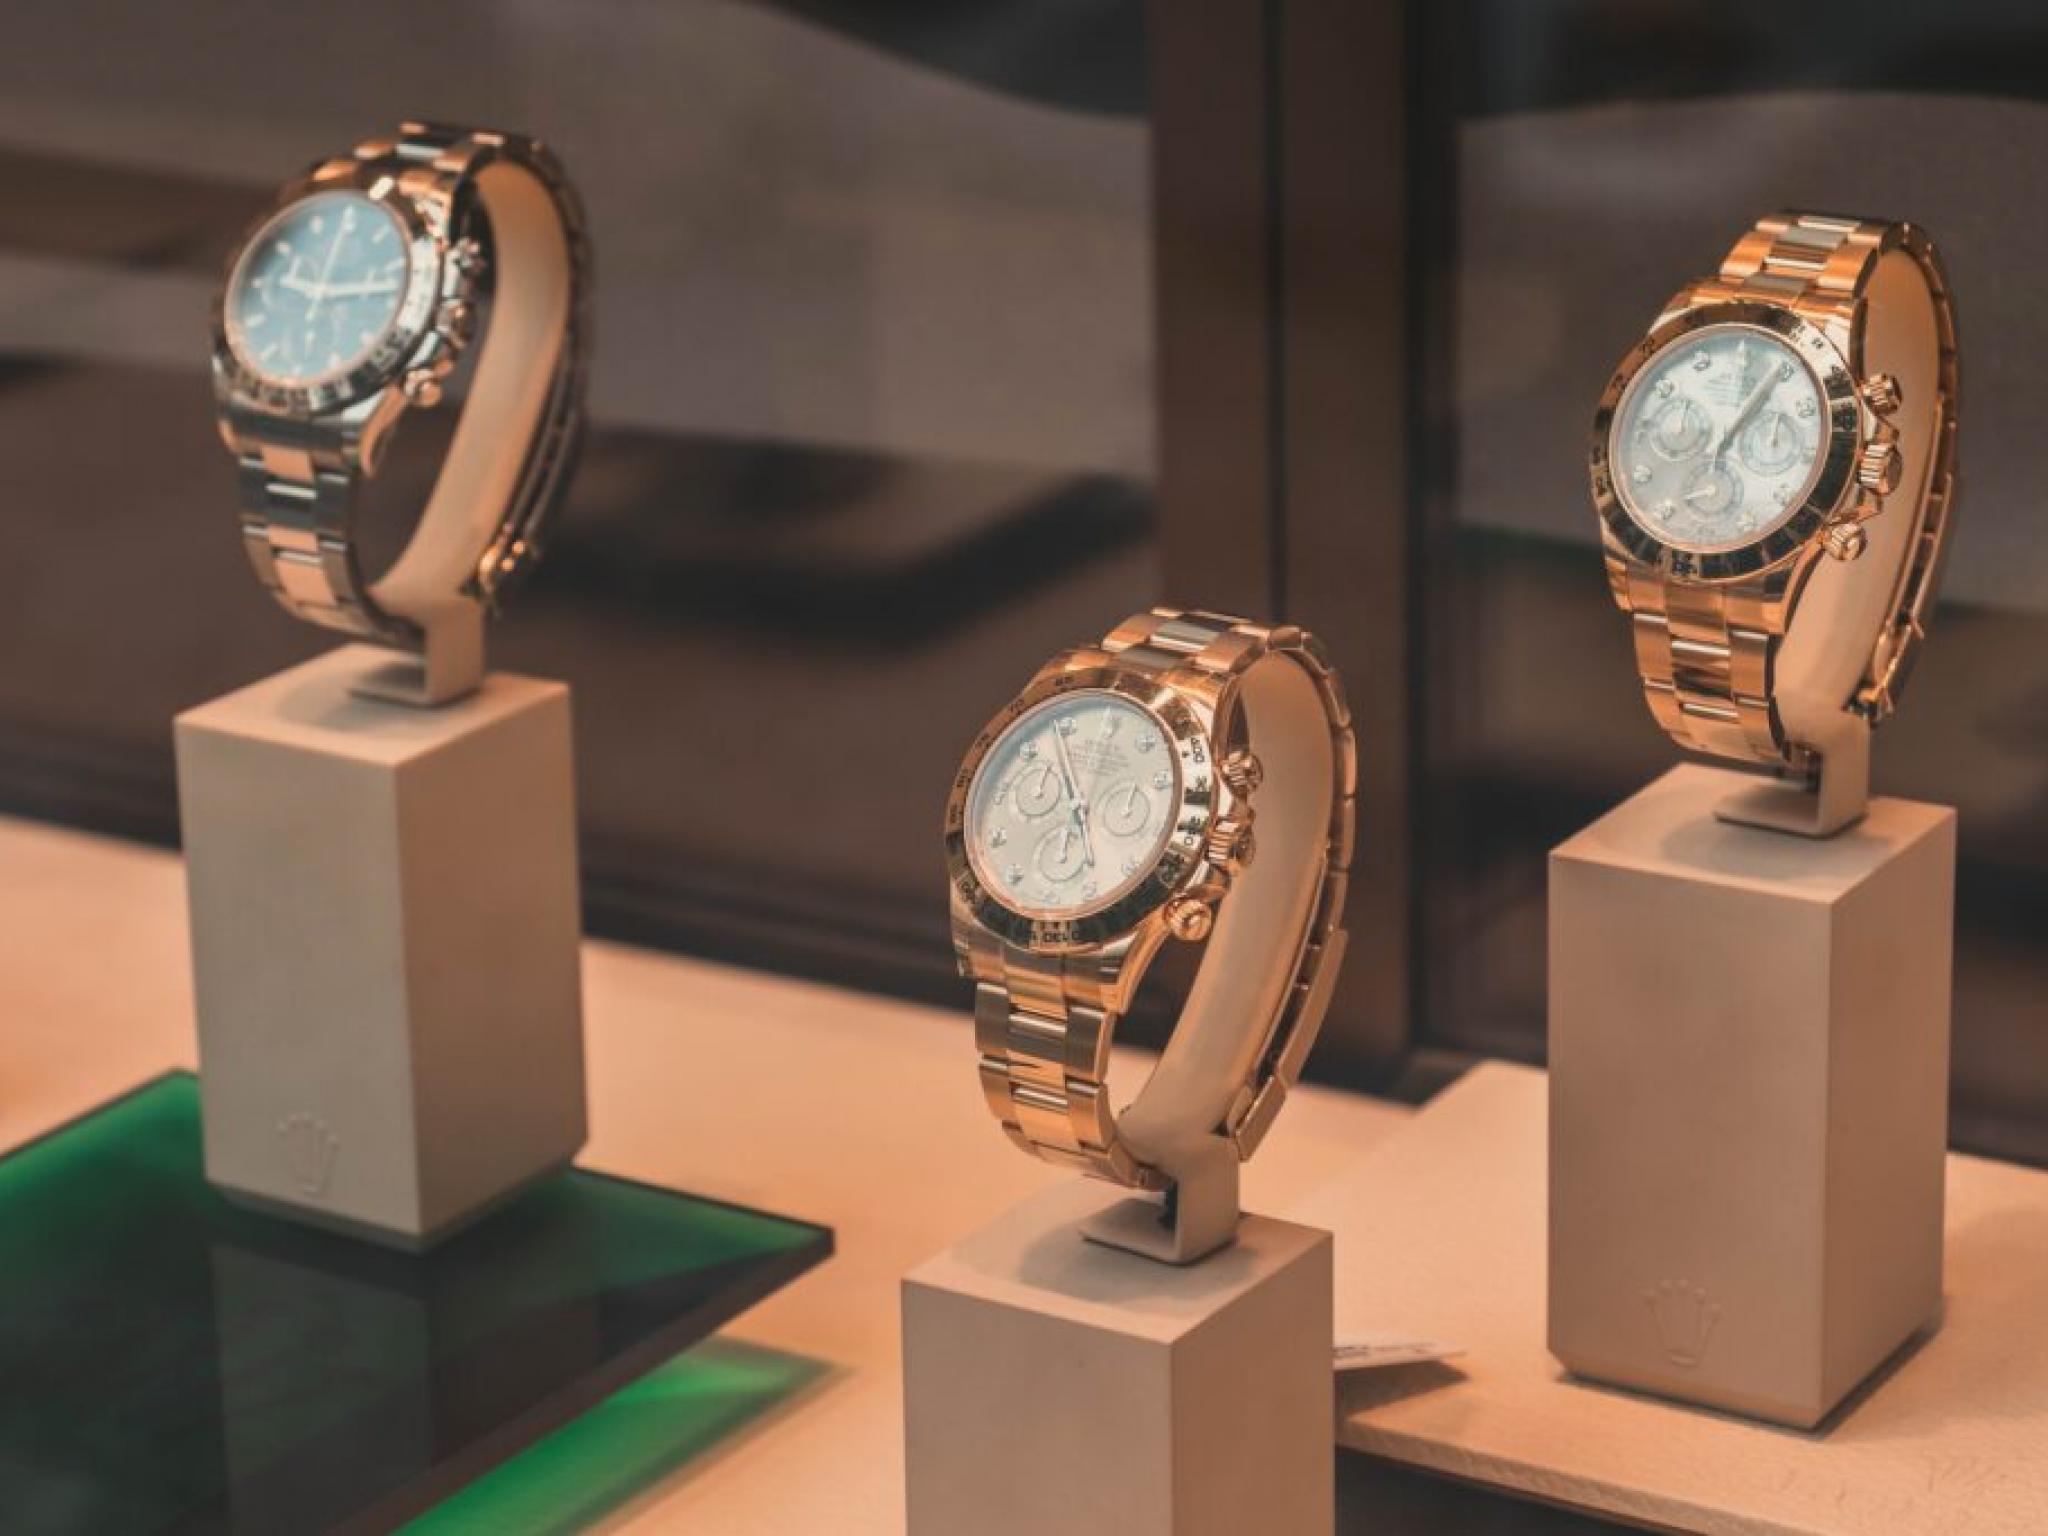  bernard-arnaults-son-sets-sights-on-30b-watch-market-with-high-end-reinvented-pieces-after-lvmh-restructuring 